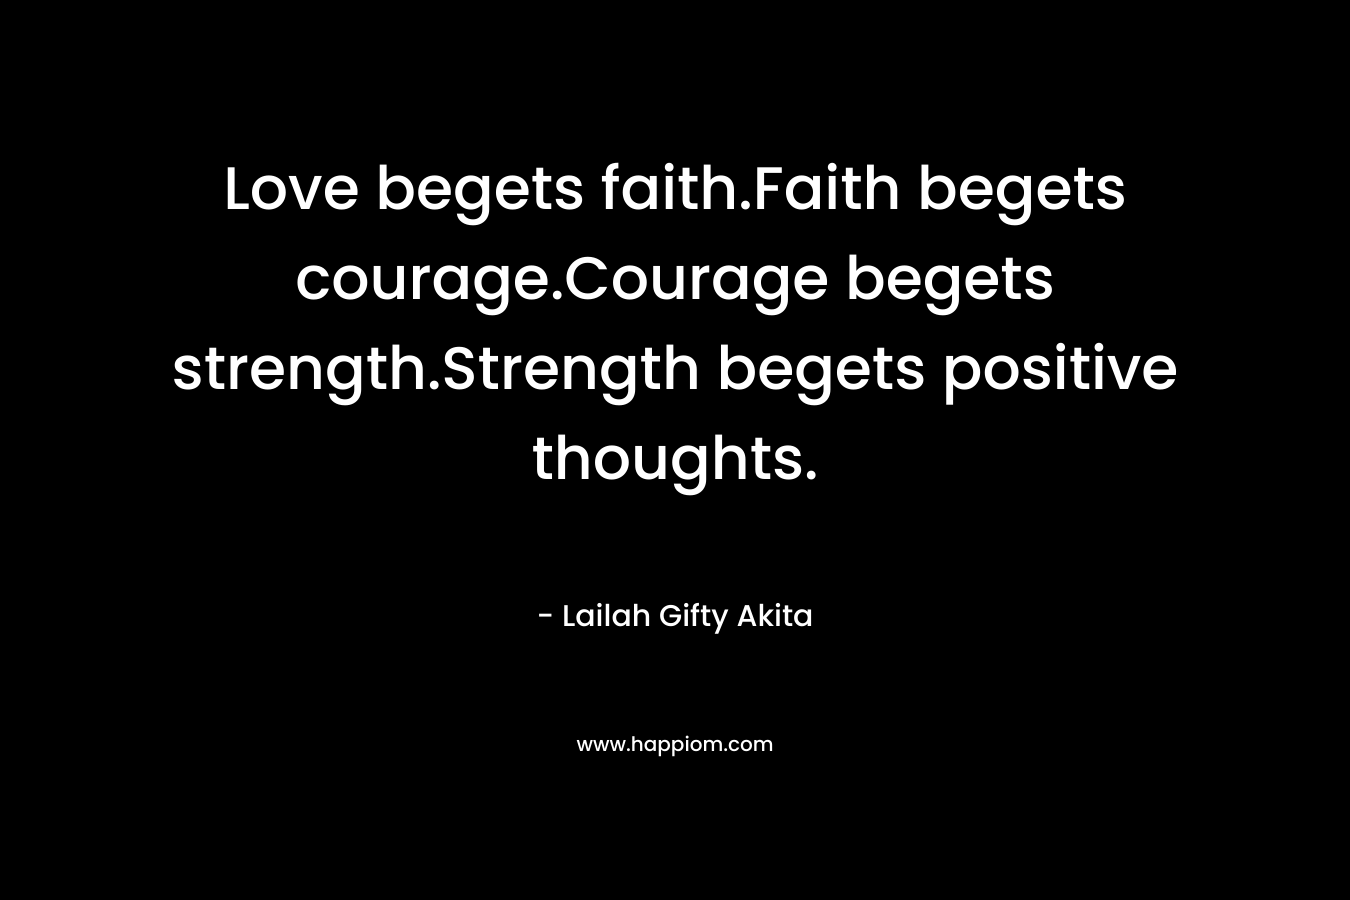 Love begets faith.Faith begets courage.Courage begets strength.Strength begets positive thoughts. – Lailah Gifty Akita